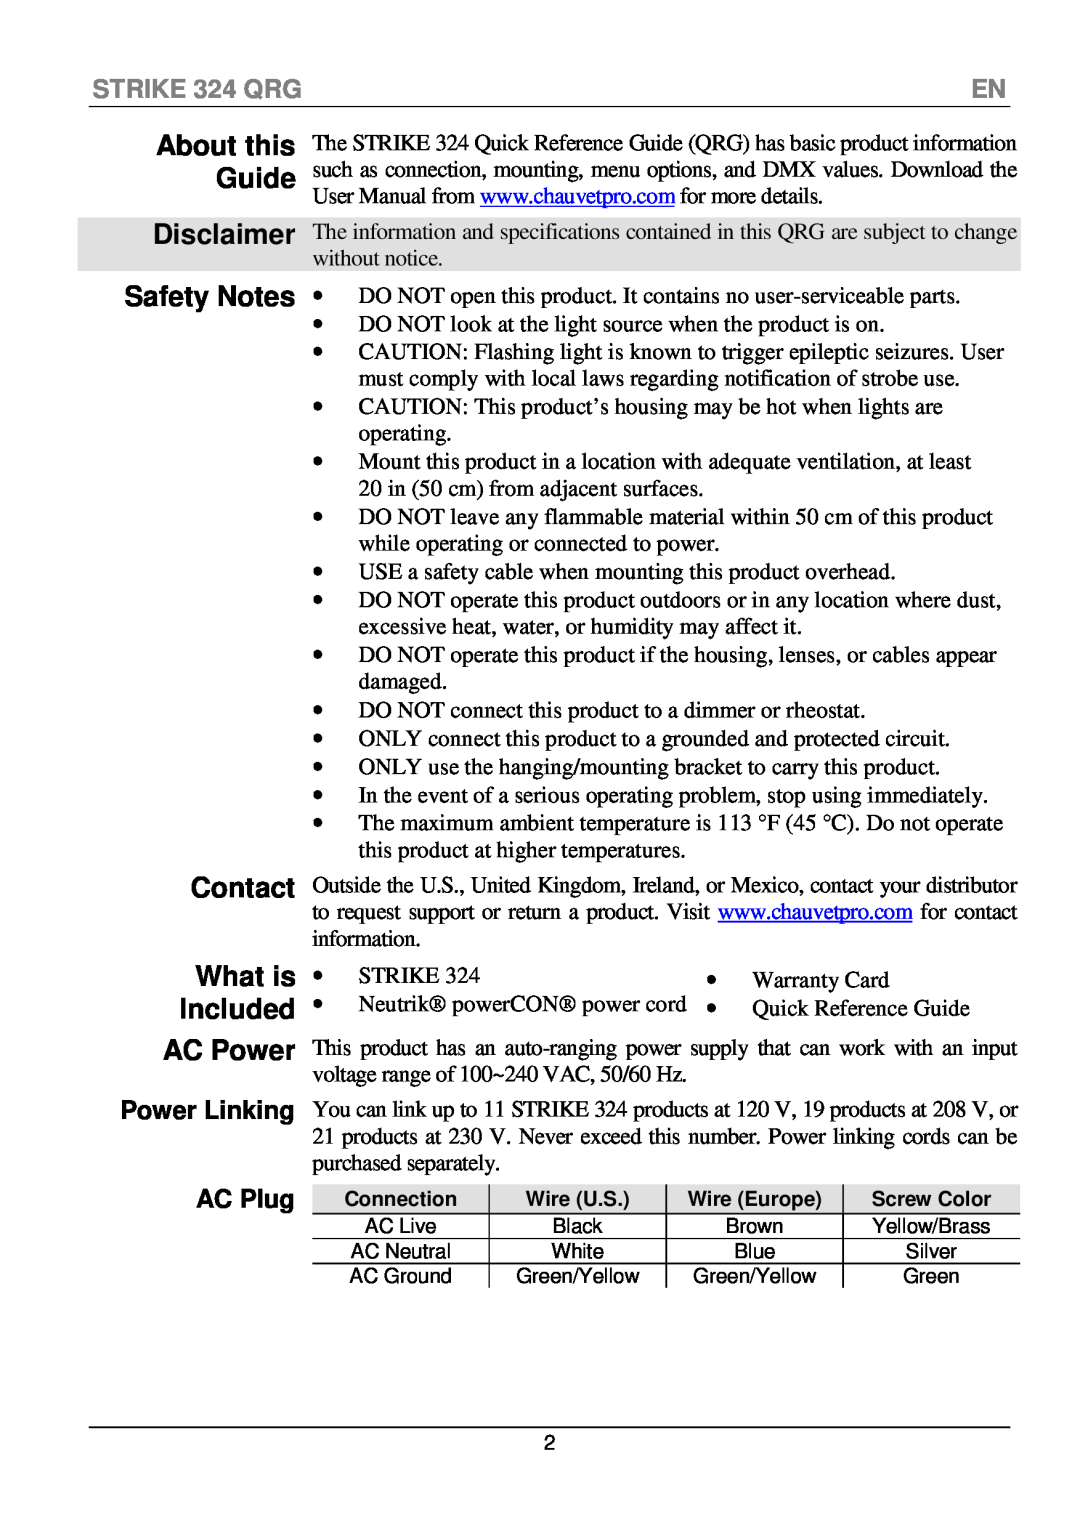 Chauvet manual Disclaimer Safety Notes Contact What is Included, AC Power, STRIKE 324 QRG, Power Linking, AC Plug 